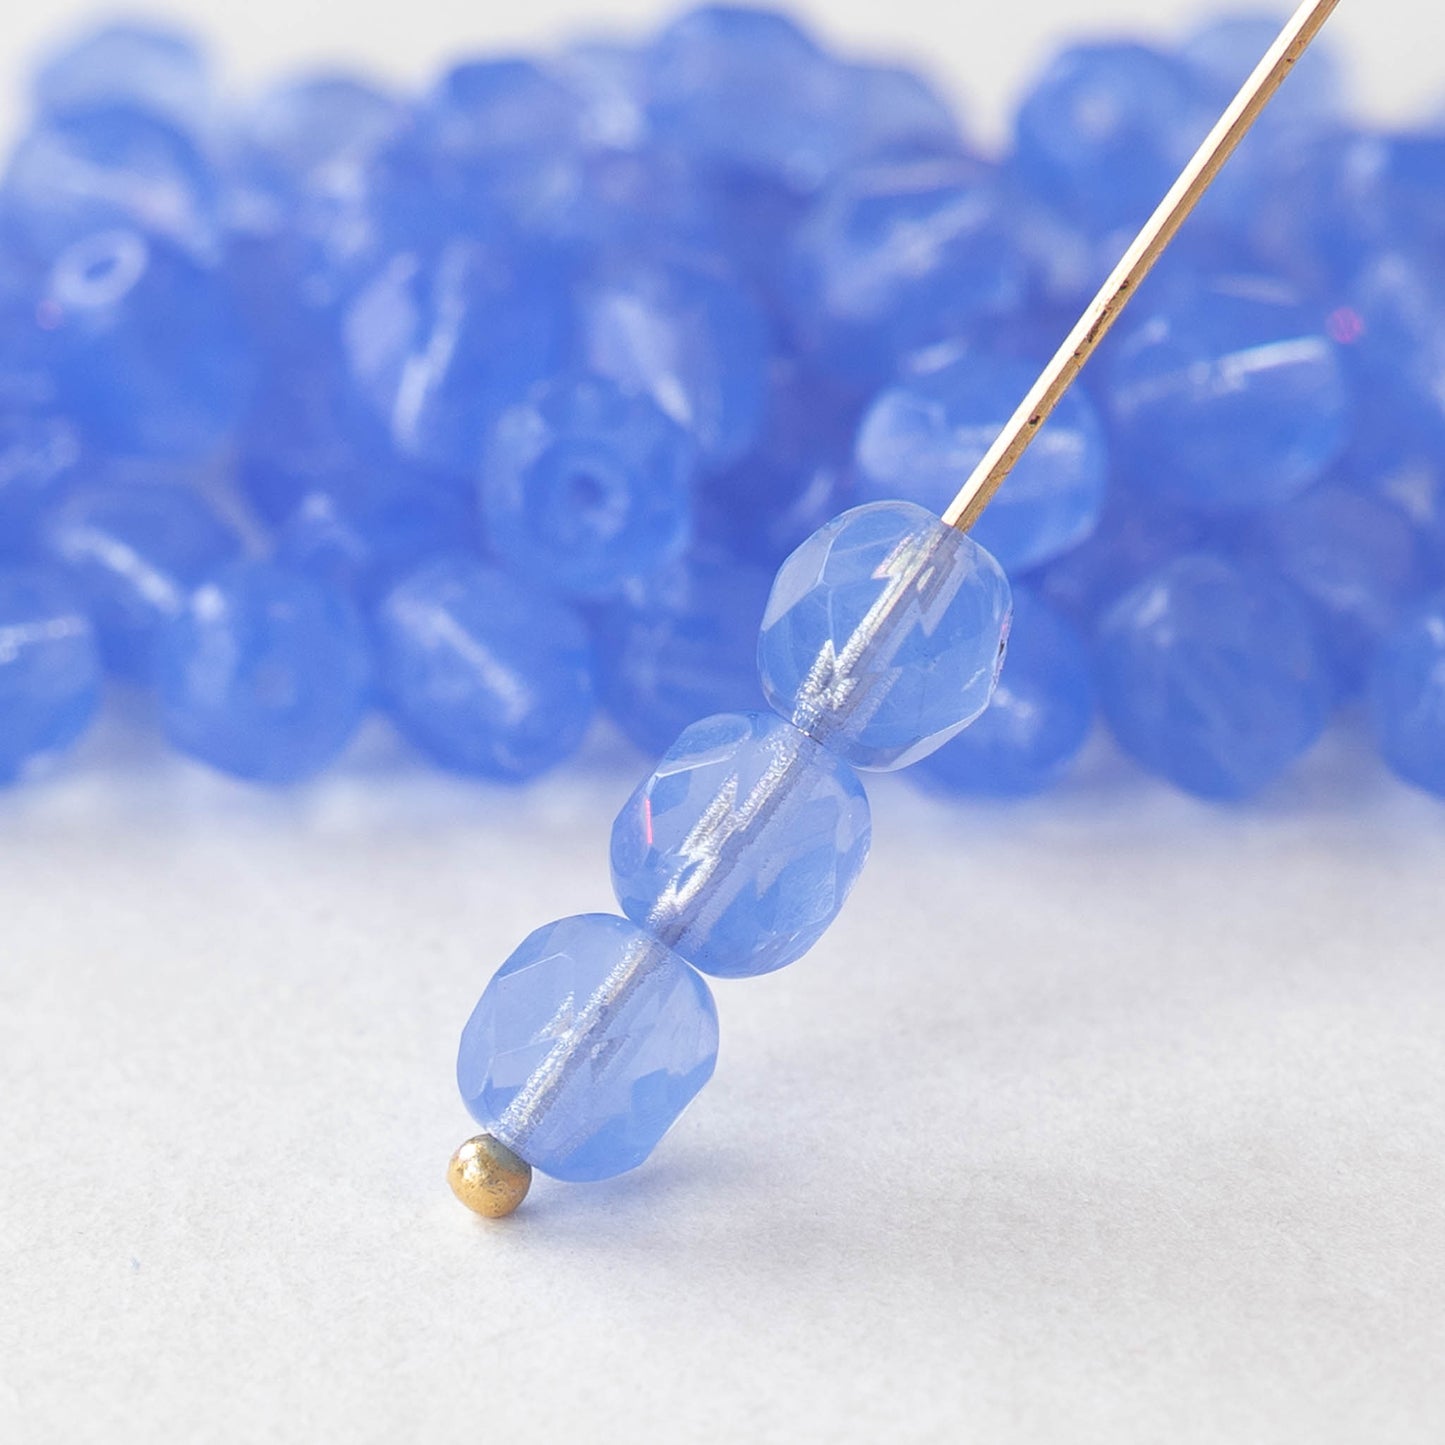 6mm Round Beads - Blue Opal - 50 beads